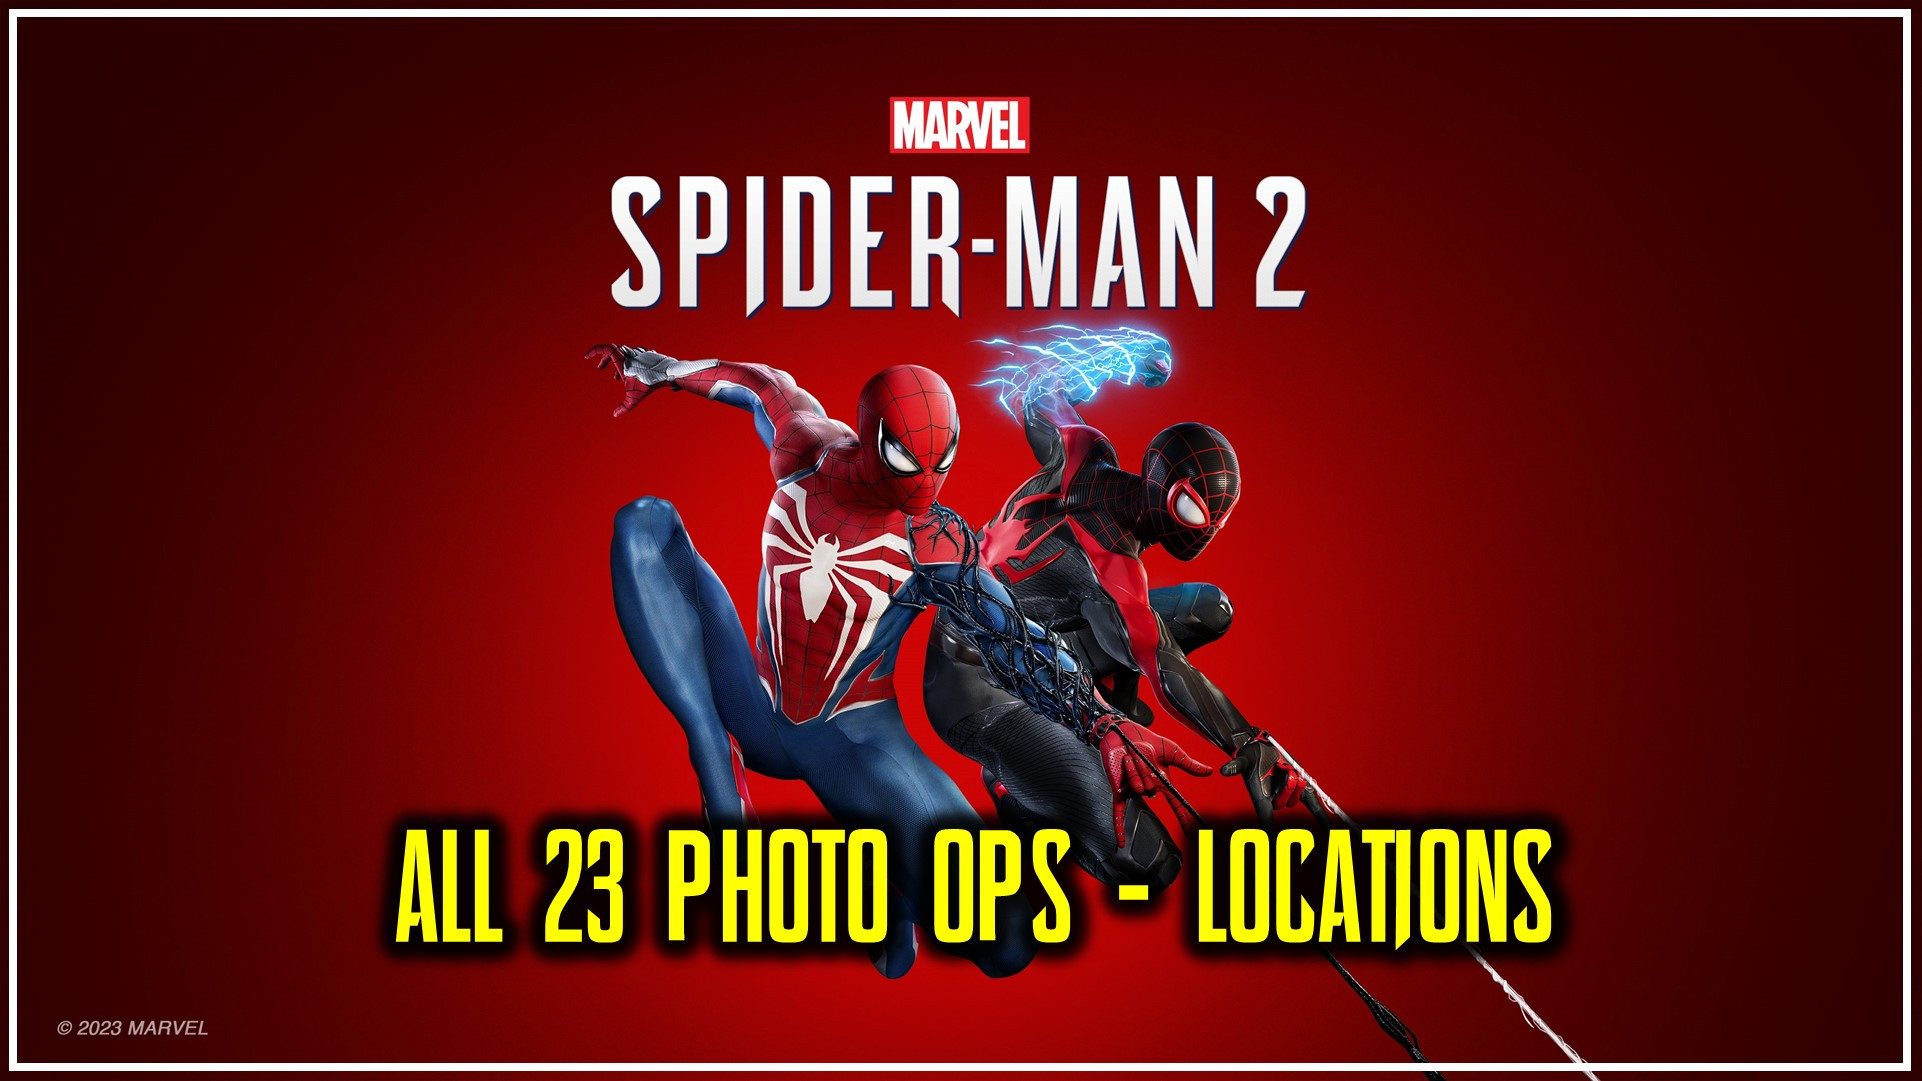 All 23 Photo Ops locations in Spider-Man 2